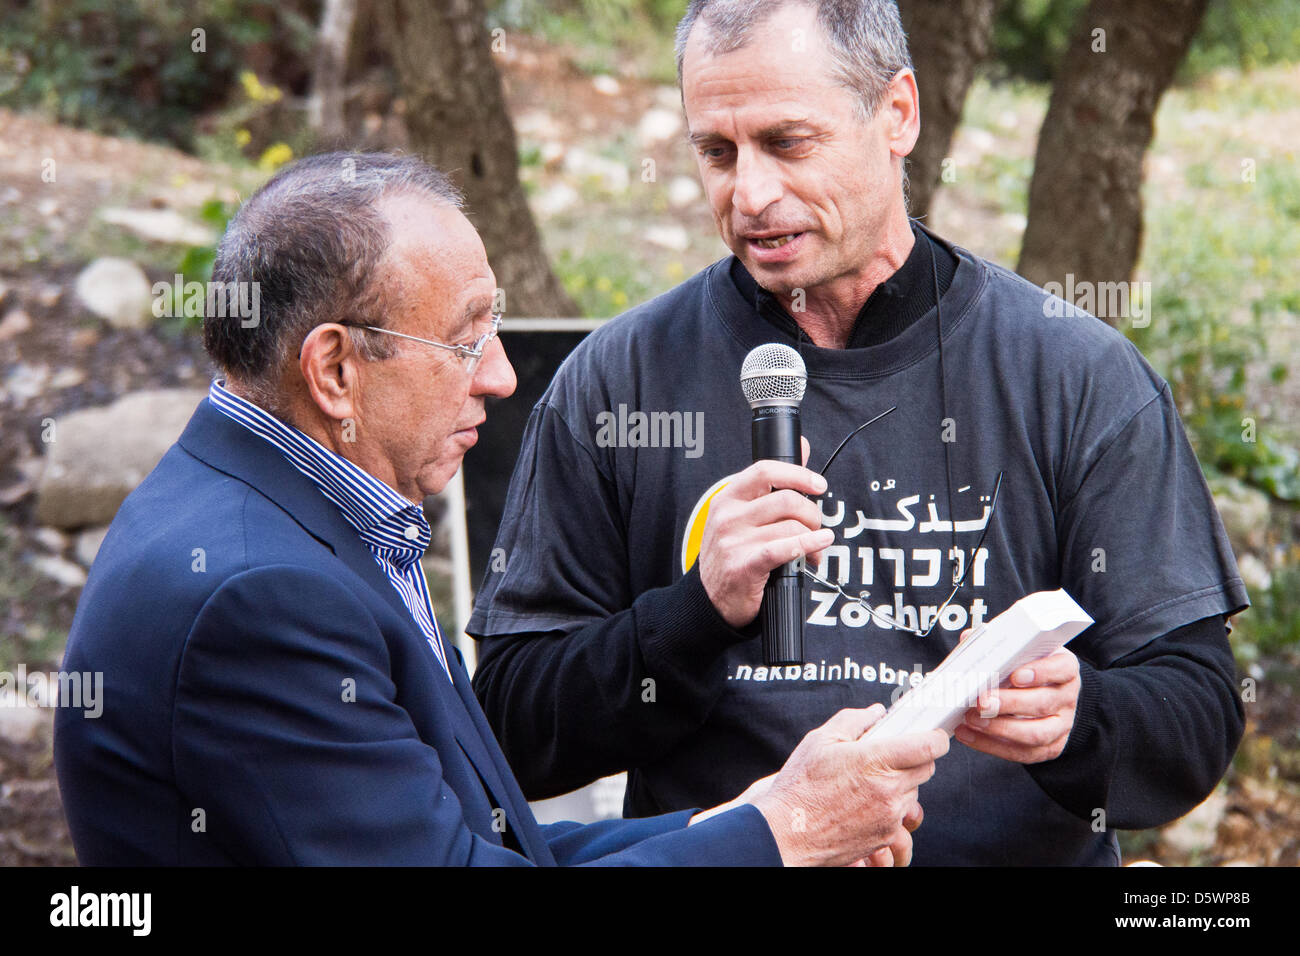 Jerusalem, Israel. 9-Apr-2013. Eitan (R), a founder of Zochrot (Remembering), an NGO seeking to raise public awareness of the Palestinian Nakba (Catastrophe), bestows a gift to Yussef Asad Radwan (L), for taking part in a commemoration procession for the Deir Yassin Massacre.   Deir Yassin, a pre-1948 Arab village adjacent to Jerusalem with a population of about 600, was invaded by paramilitaries from the Jewish Irgun and Lehi groups on April 9, 1948 and around 115 villagers were massacred. Credit: Nir Alon/Alamy Live News Stock Photo